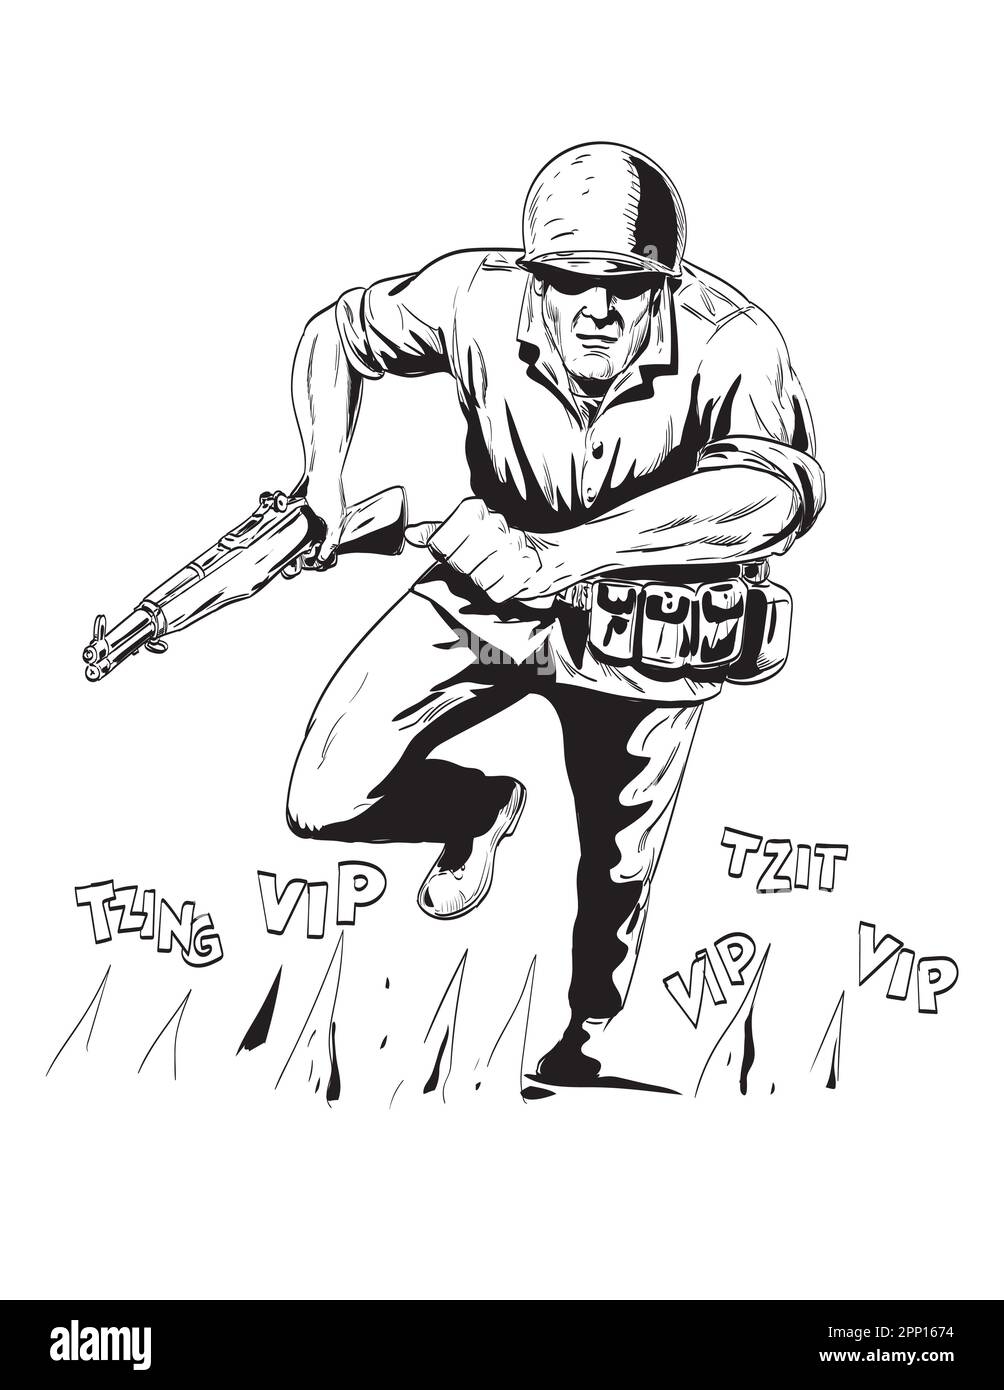 Comics style drawing or illustration of a World War Two American GI soldier running with rifle viewed from front on isolated background done in black Stock Photo